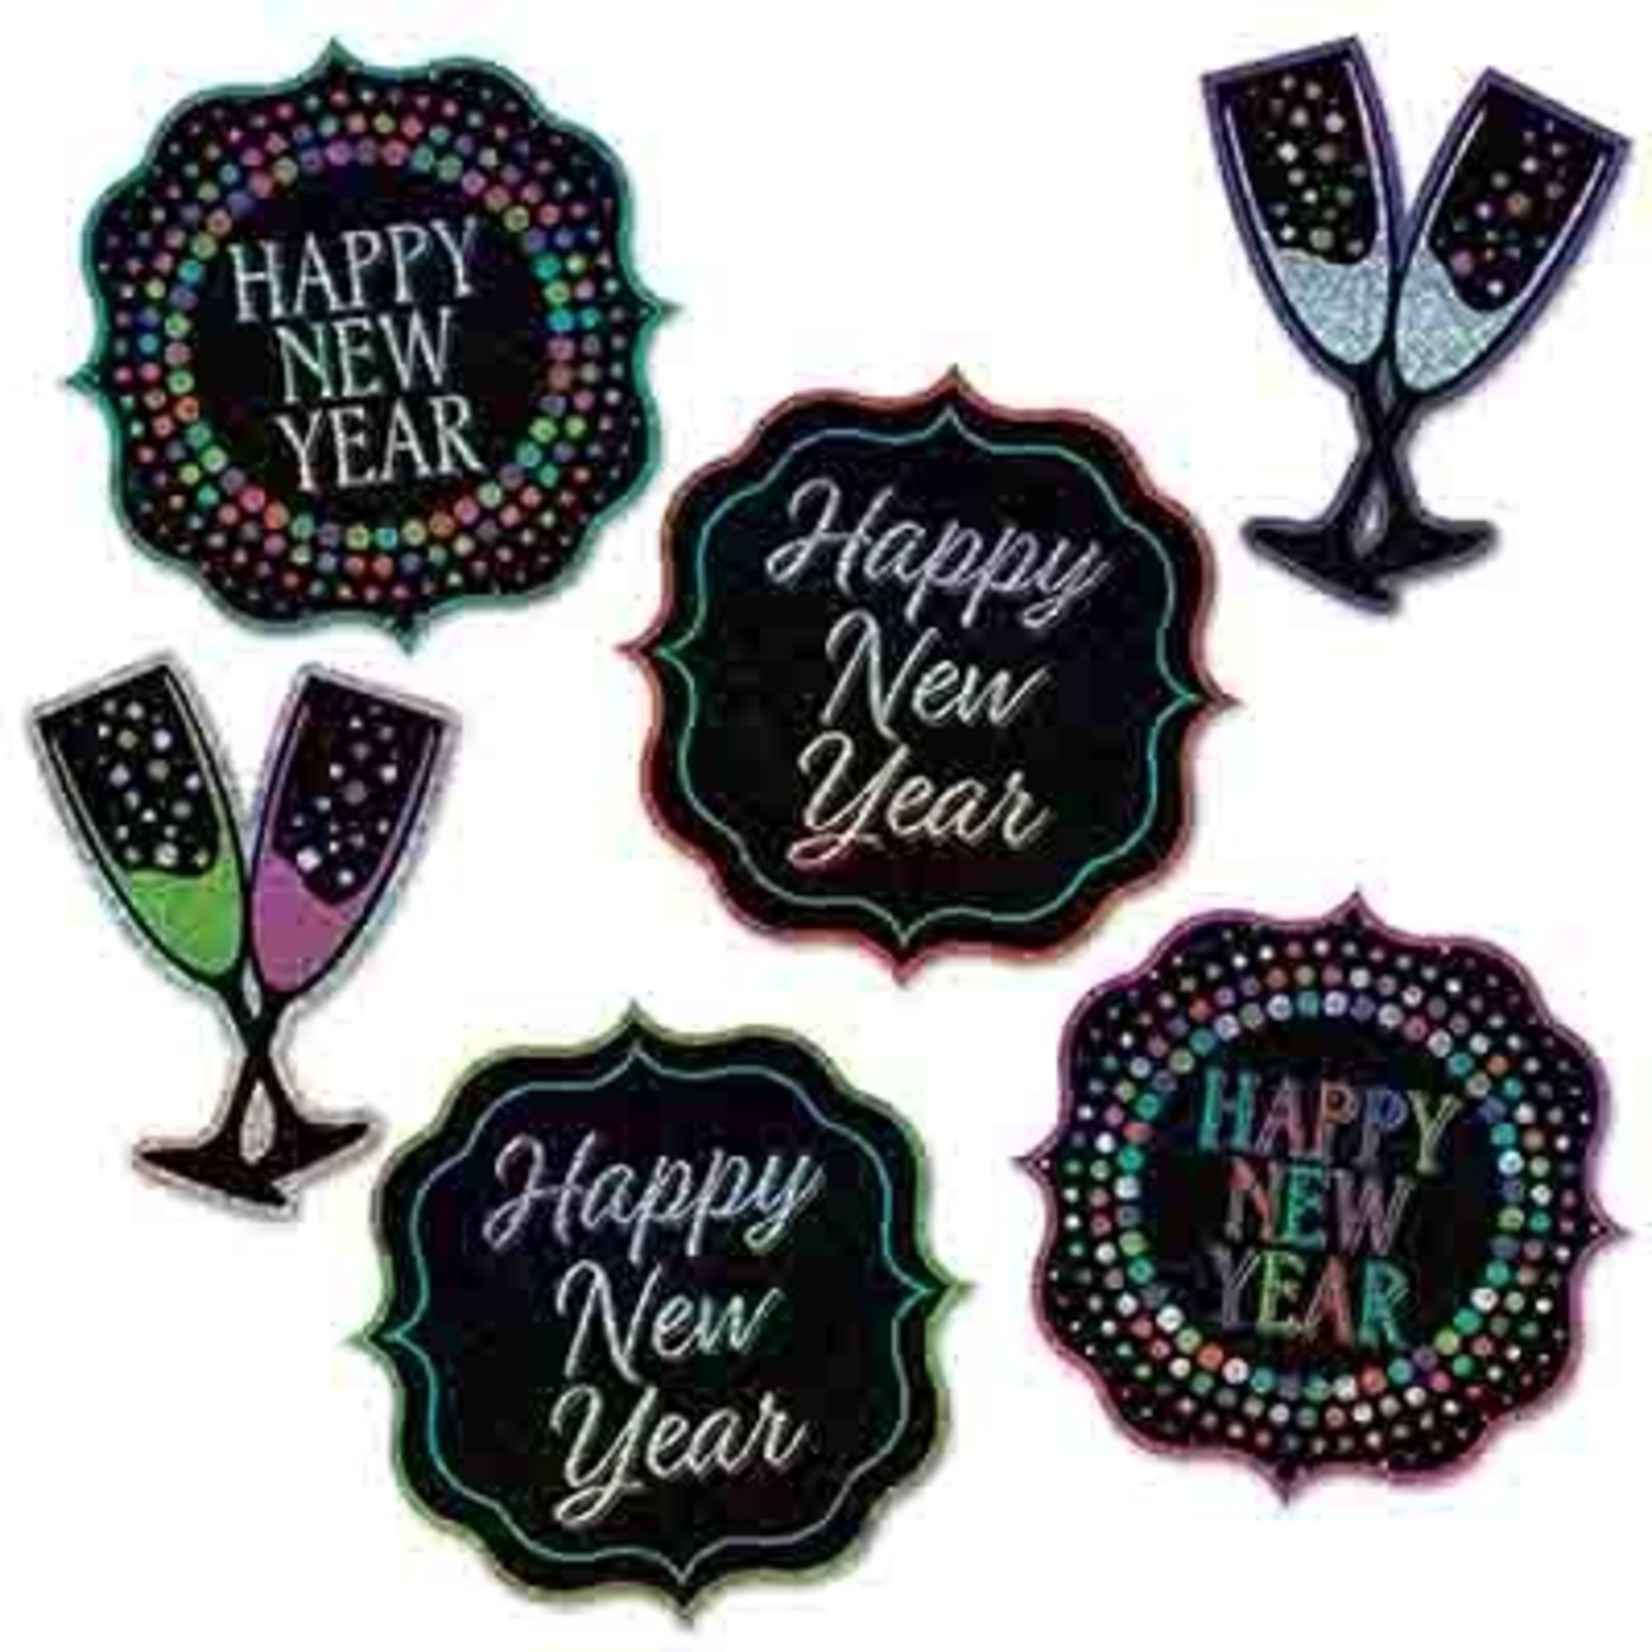 Beistle Multi-Color Happy New Year Cutouts - 6ct.